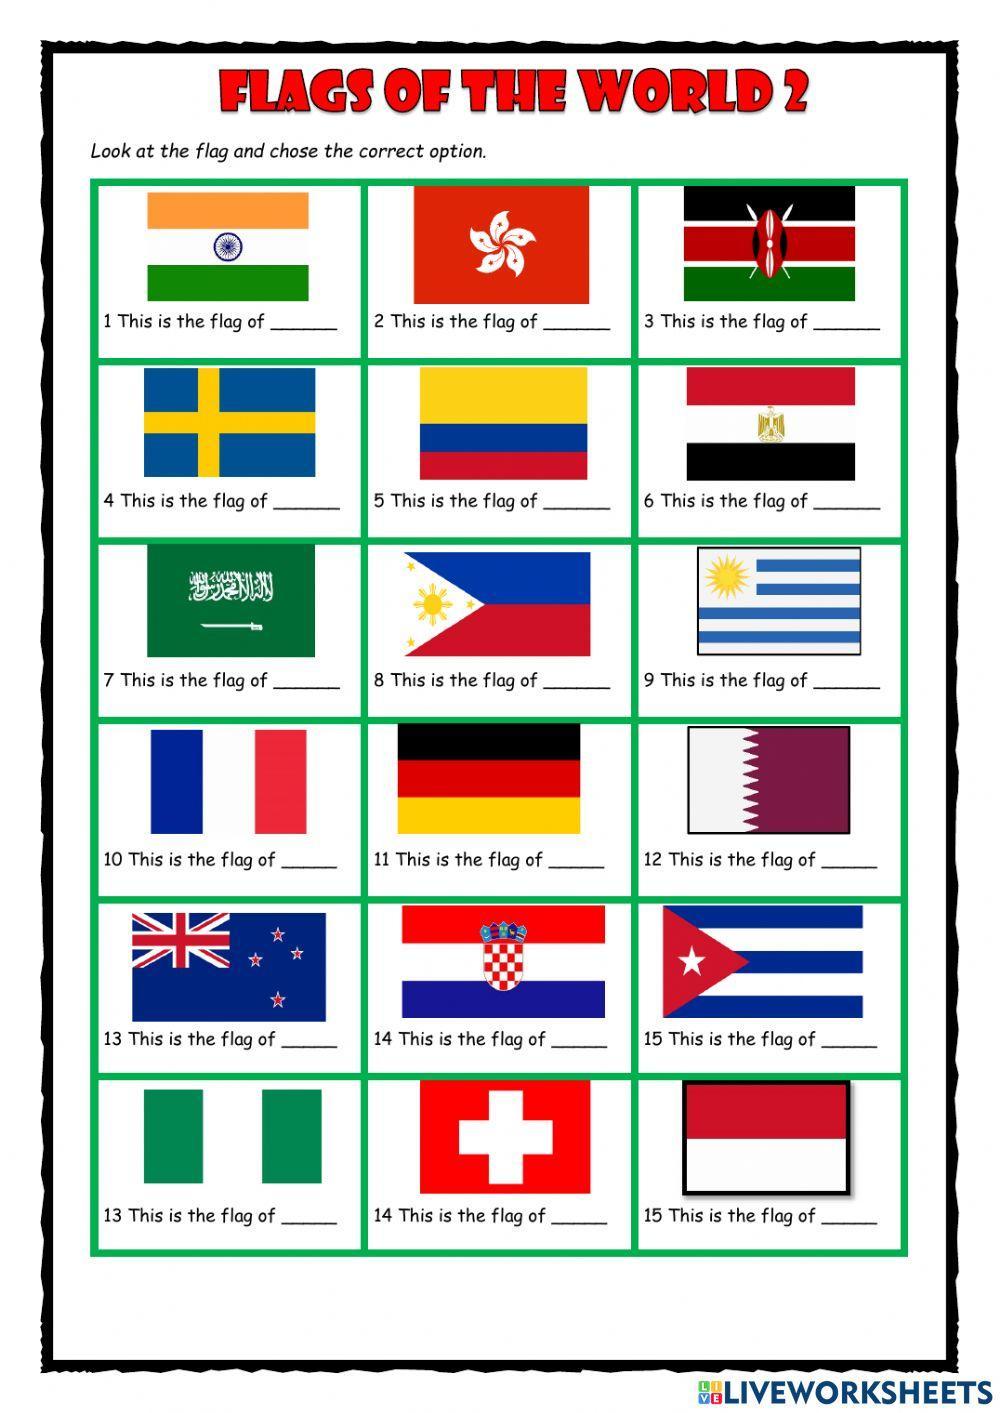 Flags of the World 2